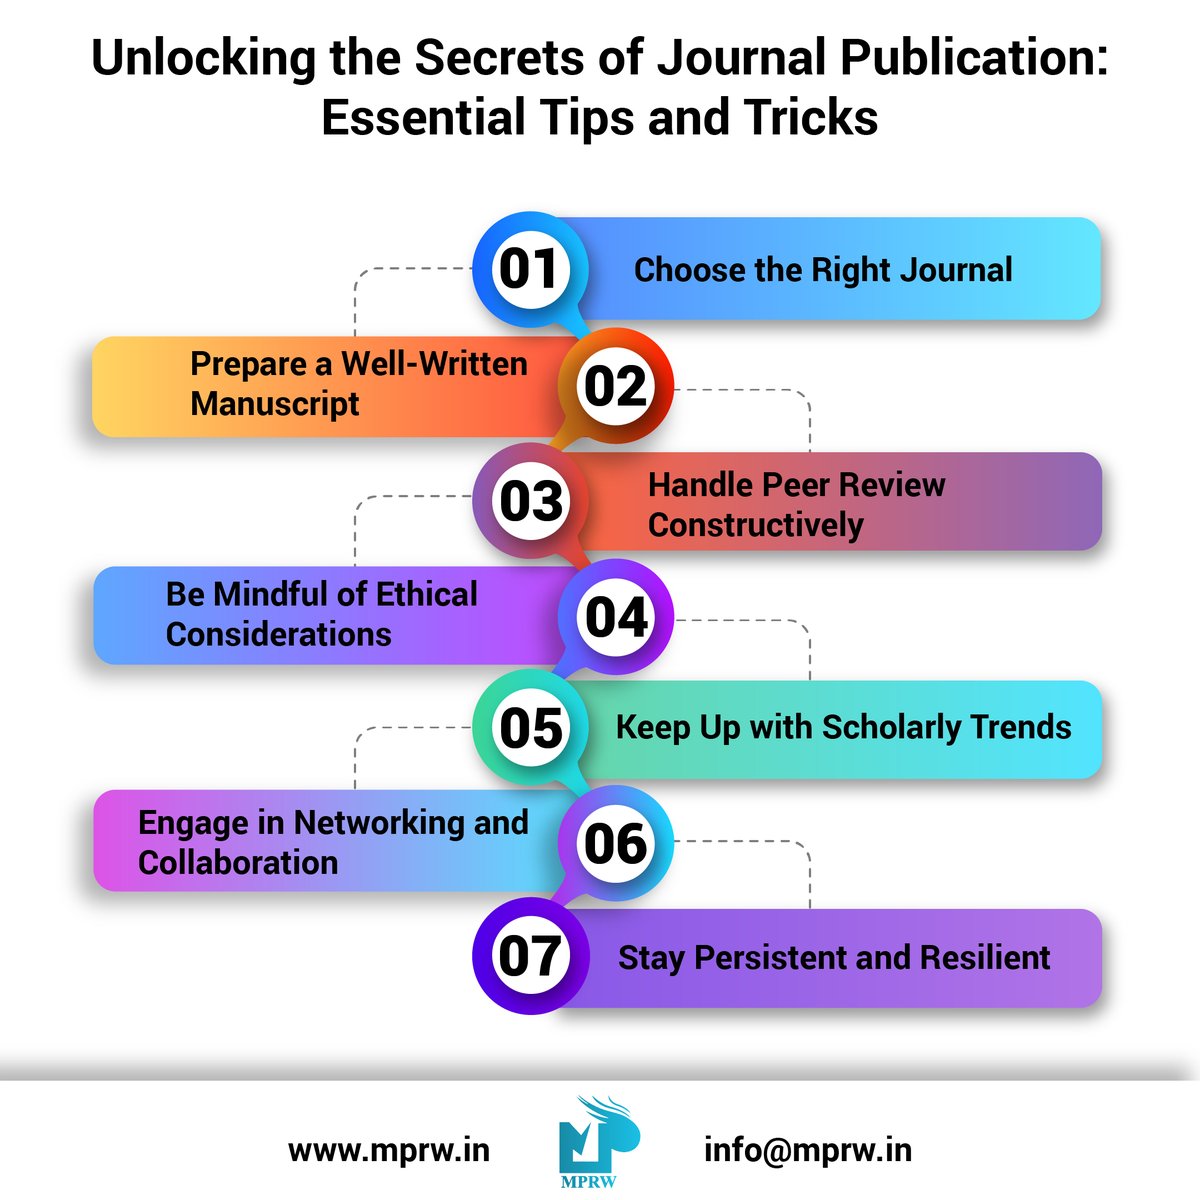 🎯'Unlocking  the Secrets of Journal Publication' is a comprehensive guide that aims  to demystify the process and provide essential insights and strategies  for success.  

#StatisticalAnalysis #DataDrivenDecisions #UnlockingInsights #journalpublishing  #WRIRK #mpresearch #MP2IT